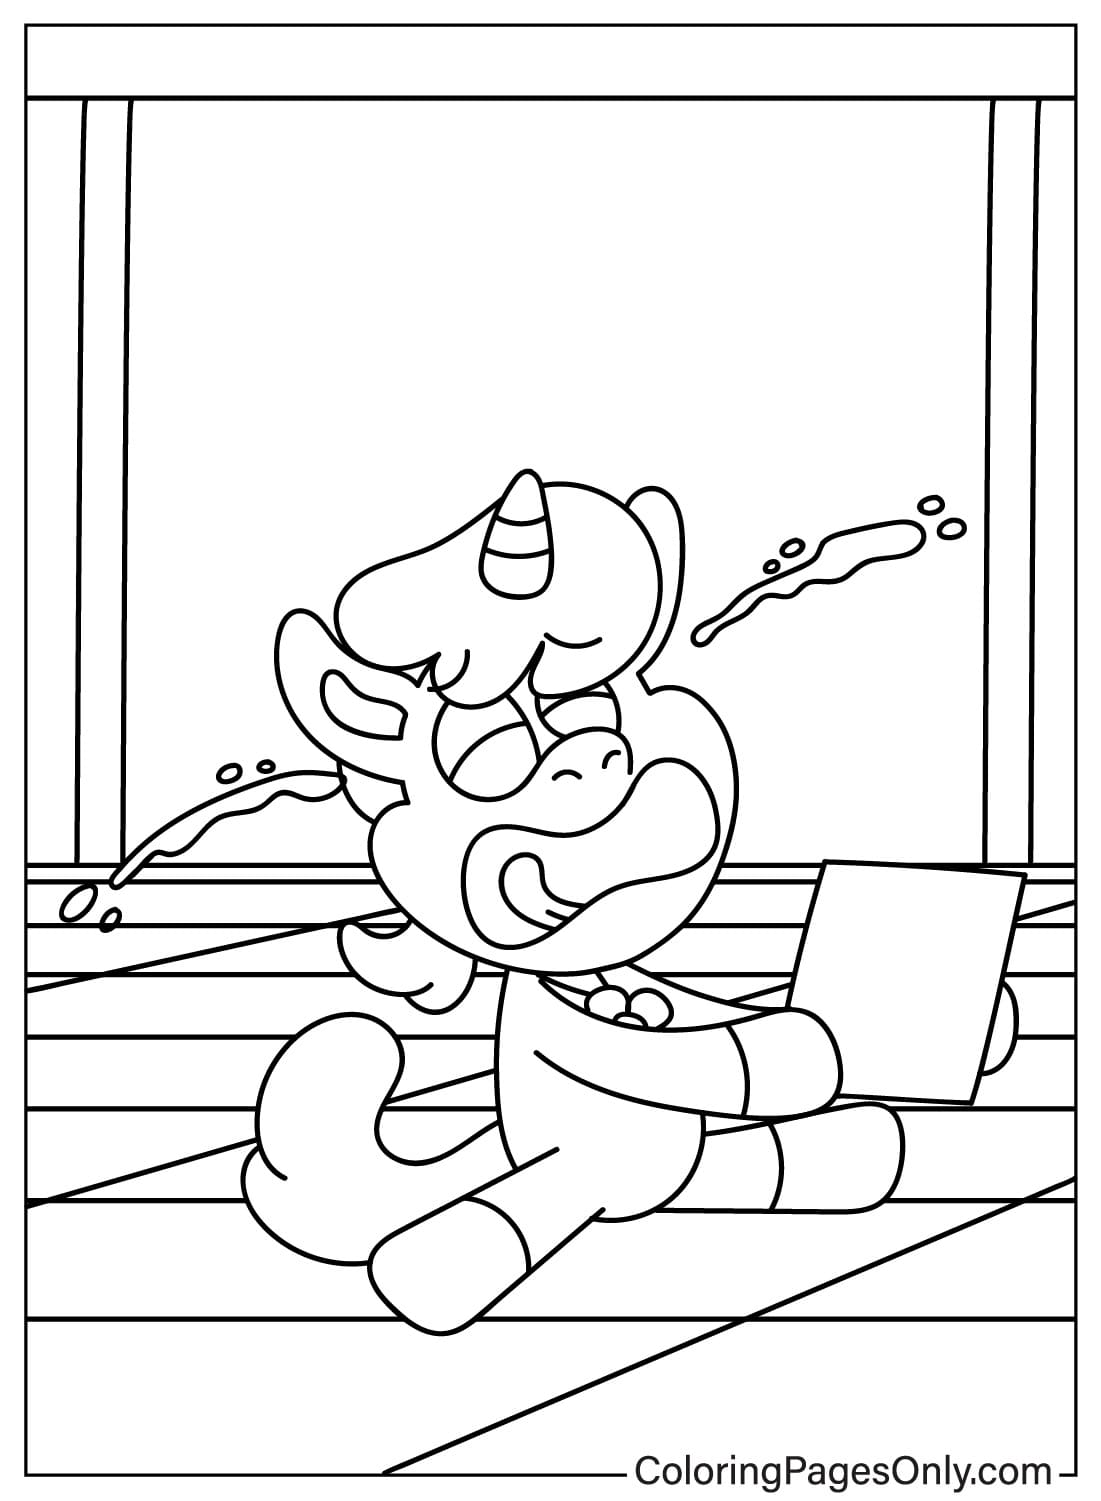 CraftyCorn Crying Coloring Page from CraftyCorn